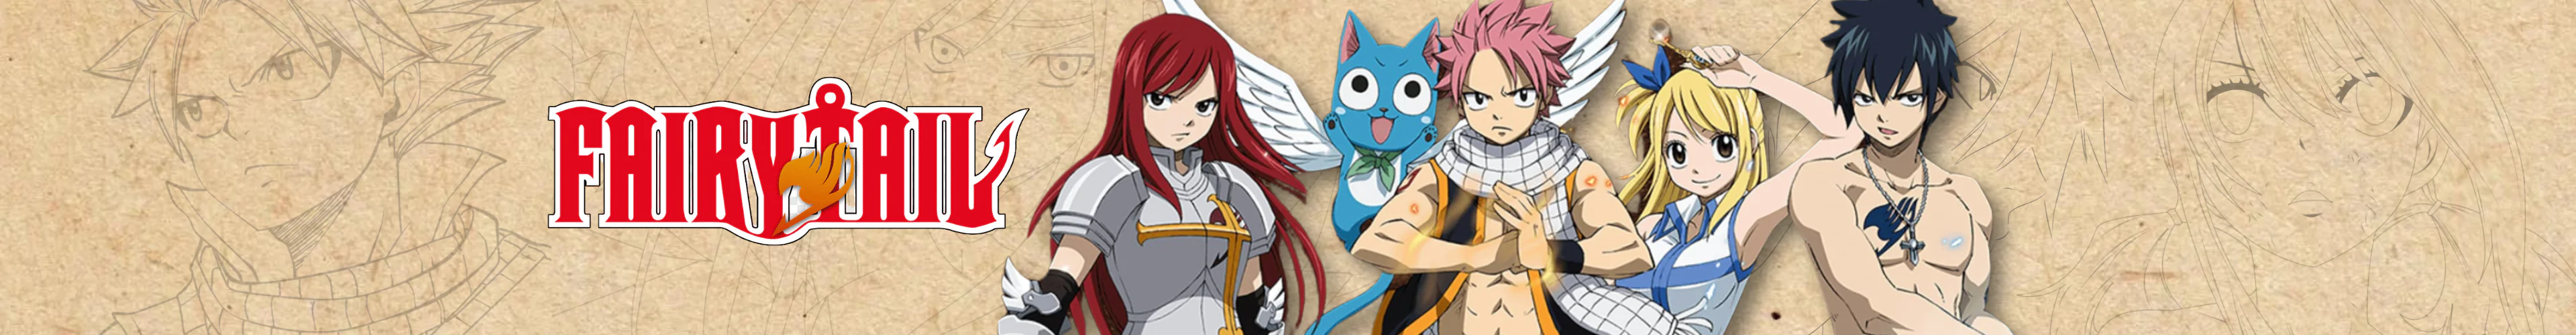 Fairy Tail figures banner